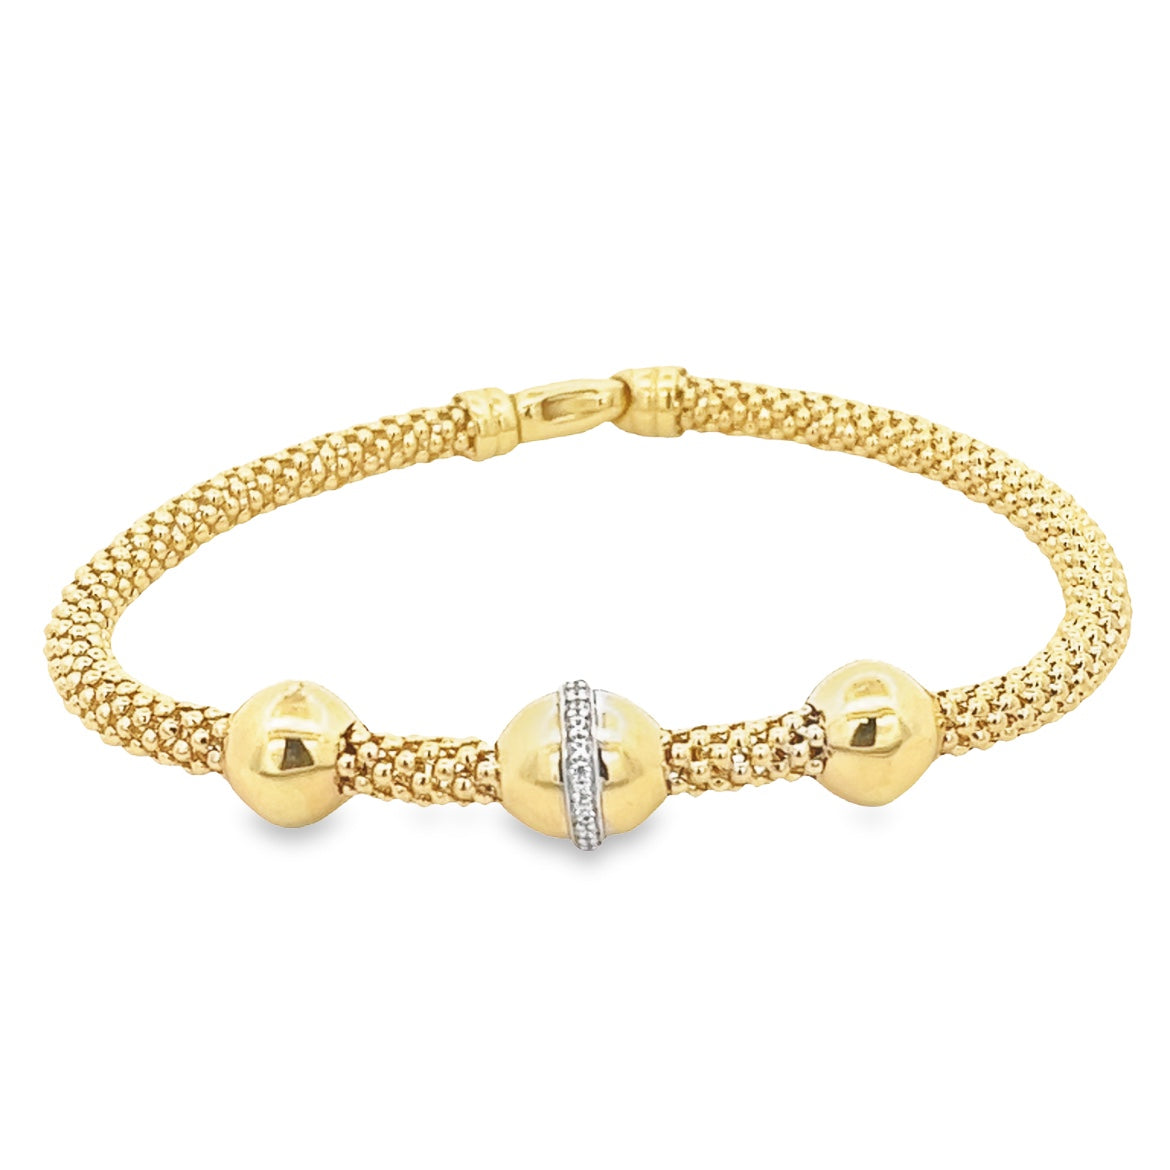 14K GOLD MESH BRACELET WITH ROUND CHARMS